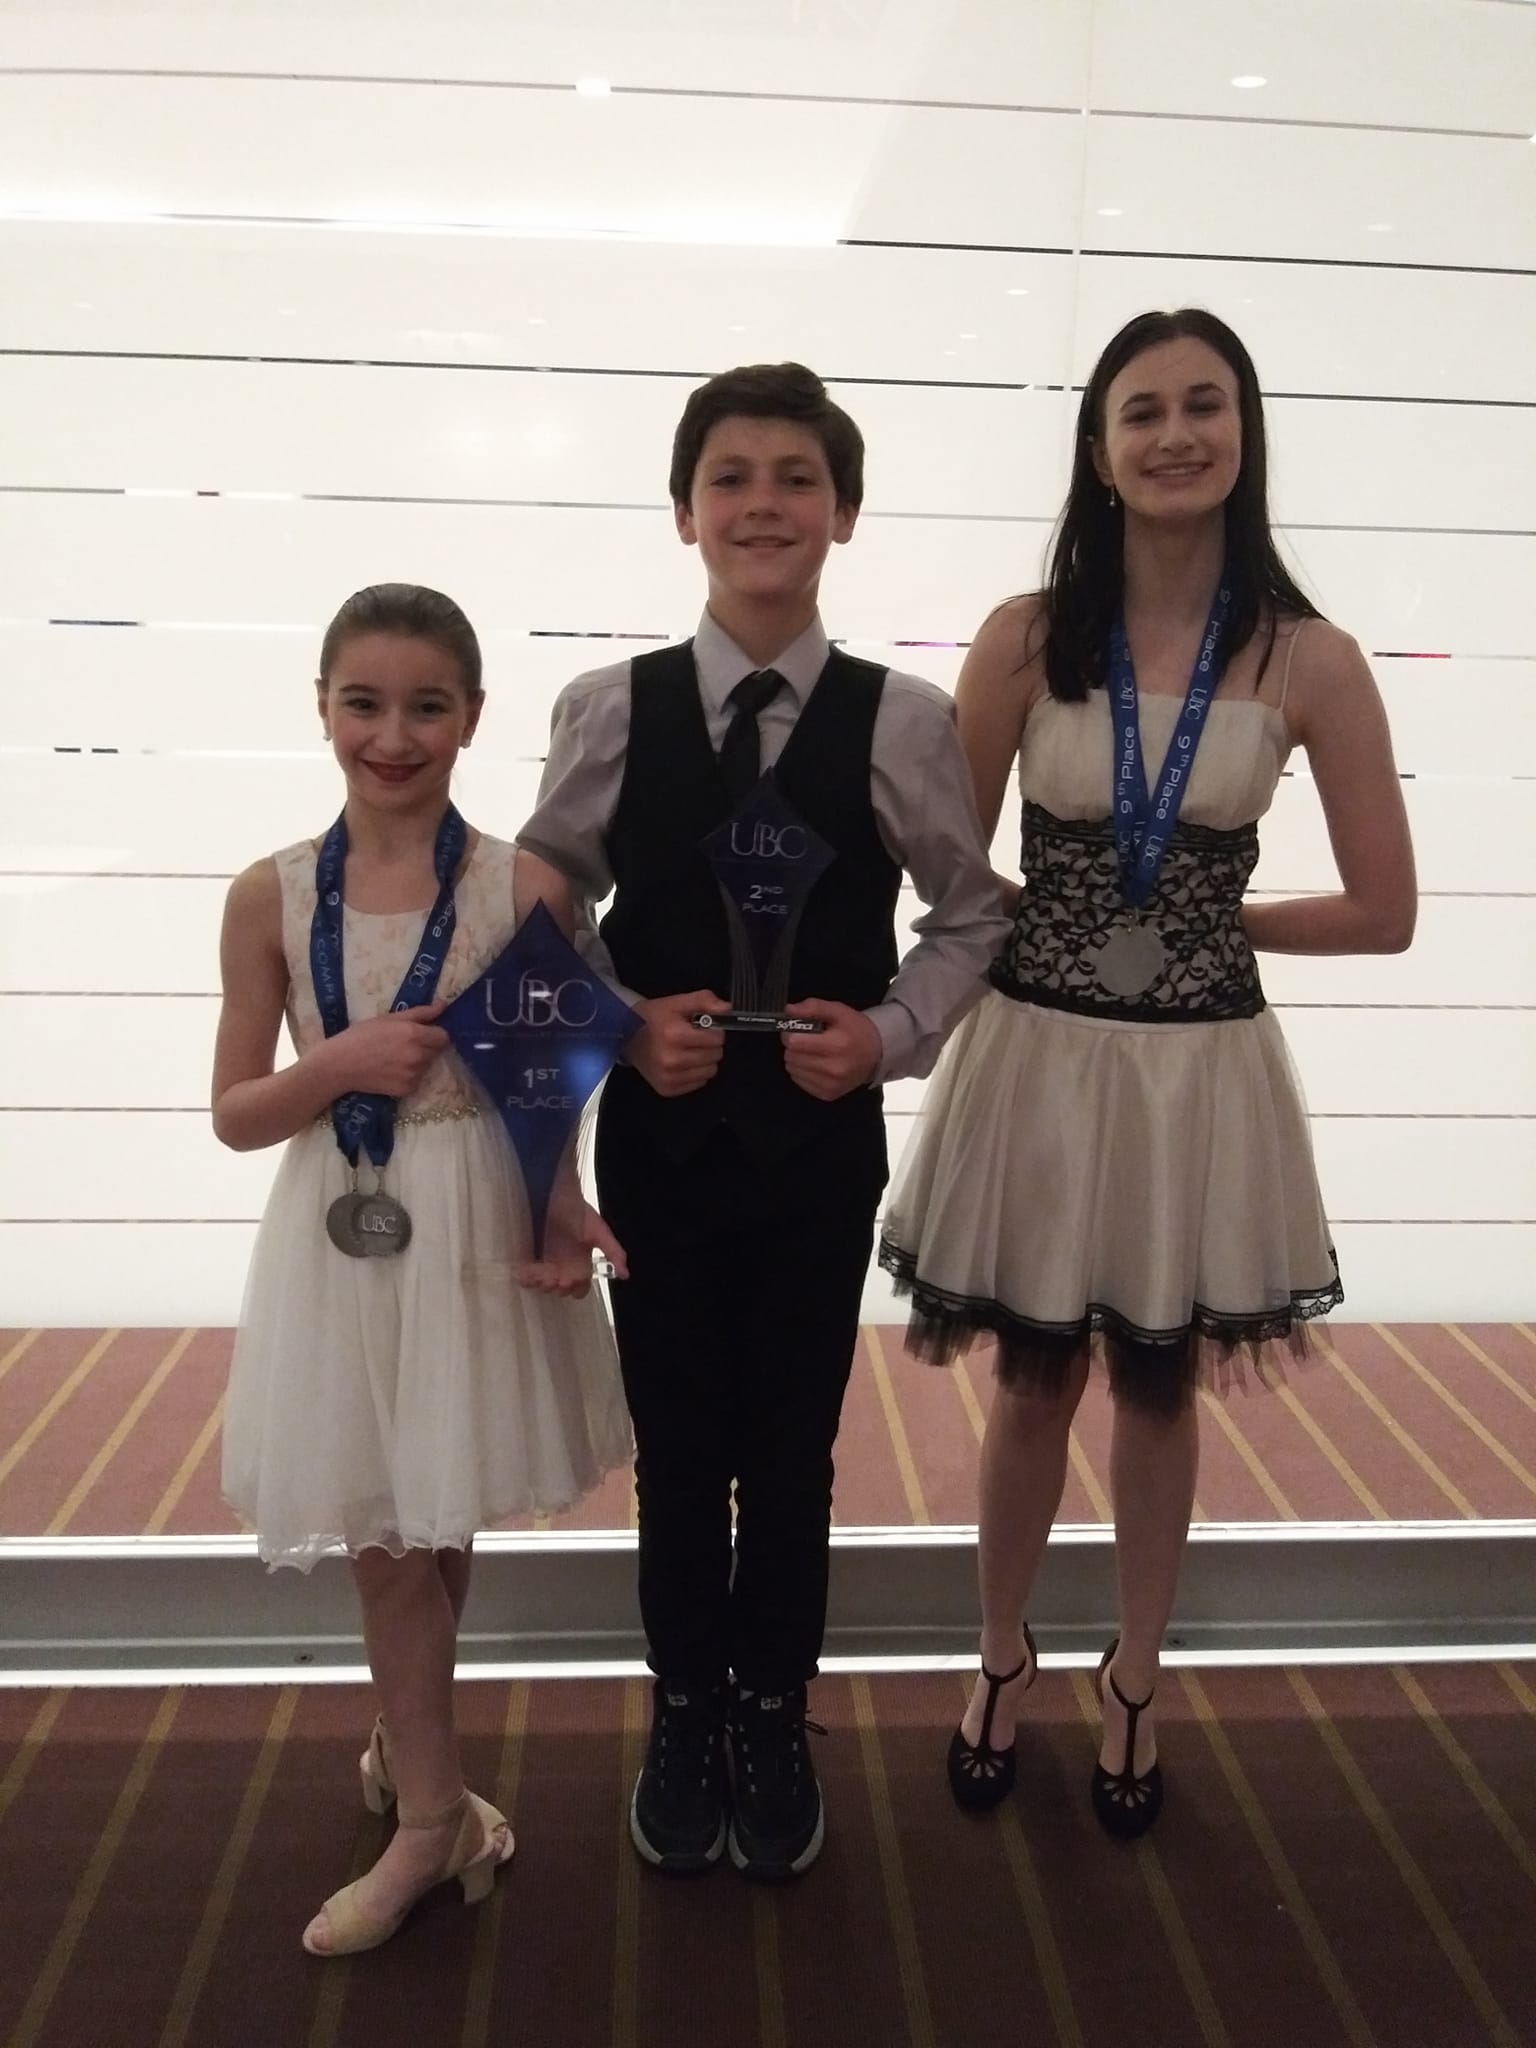 Some of our students who placed at the Universal Ballet Competition